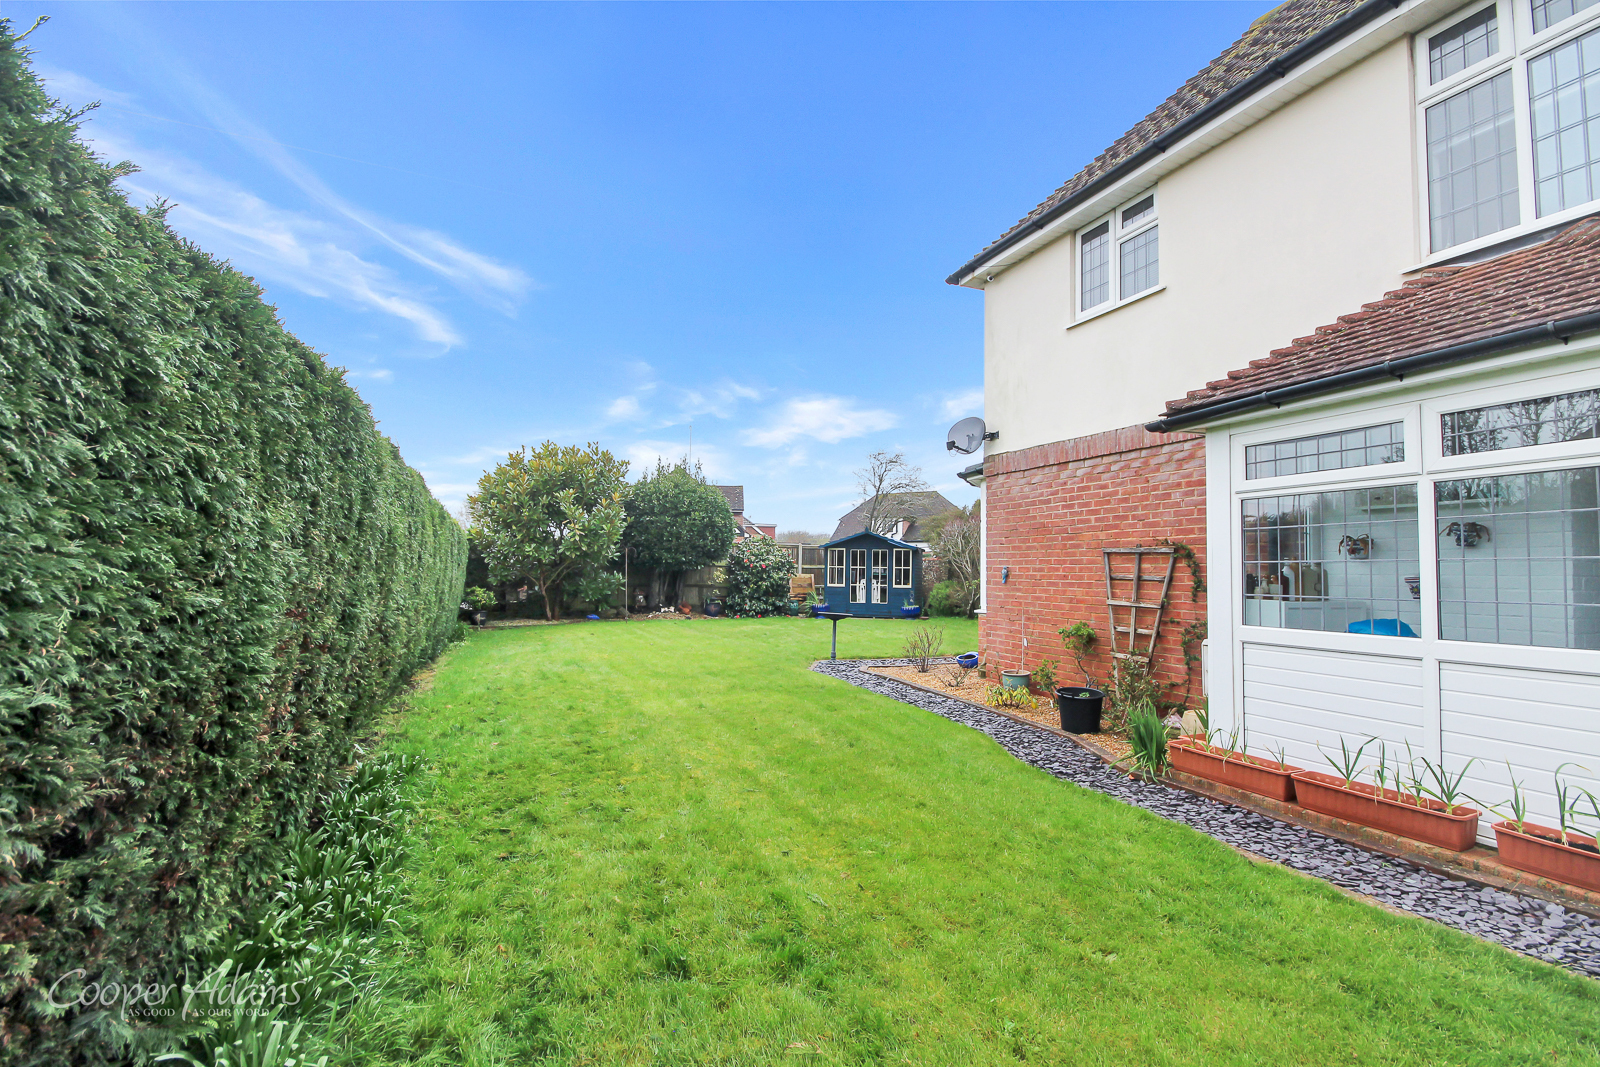 4 bed house for sale in Holmes Lane, Rustington 10